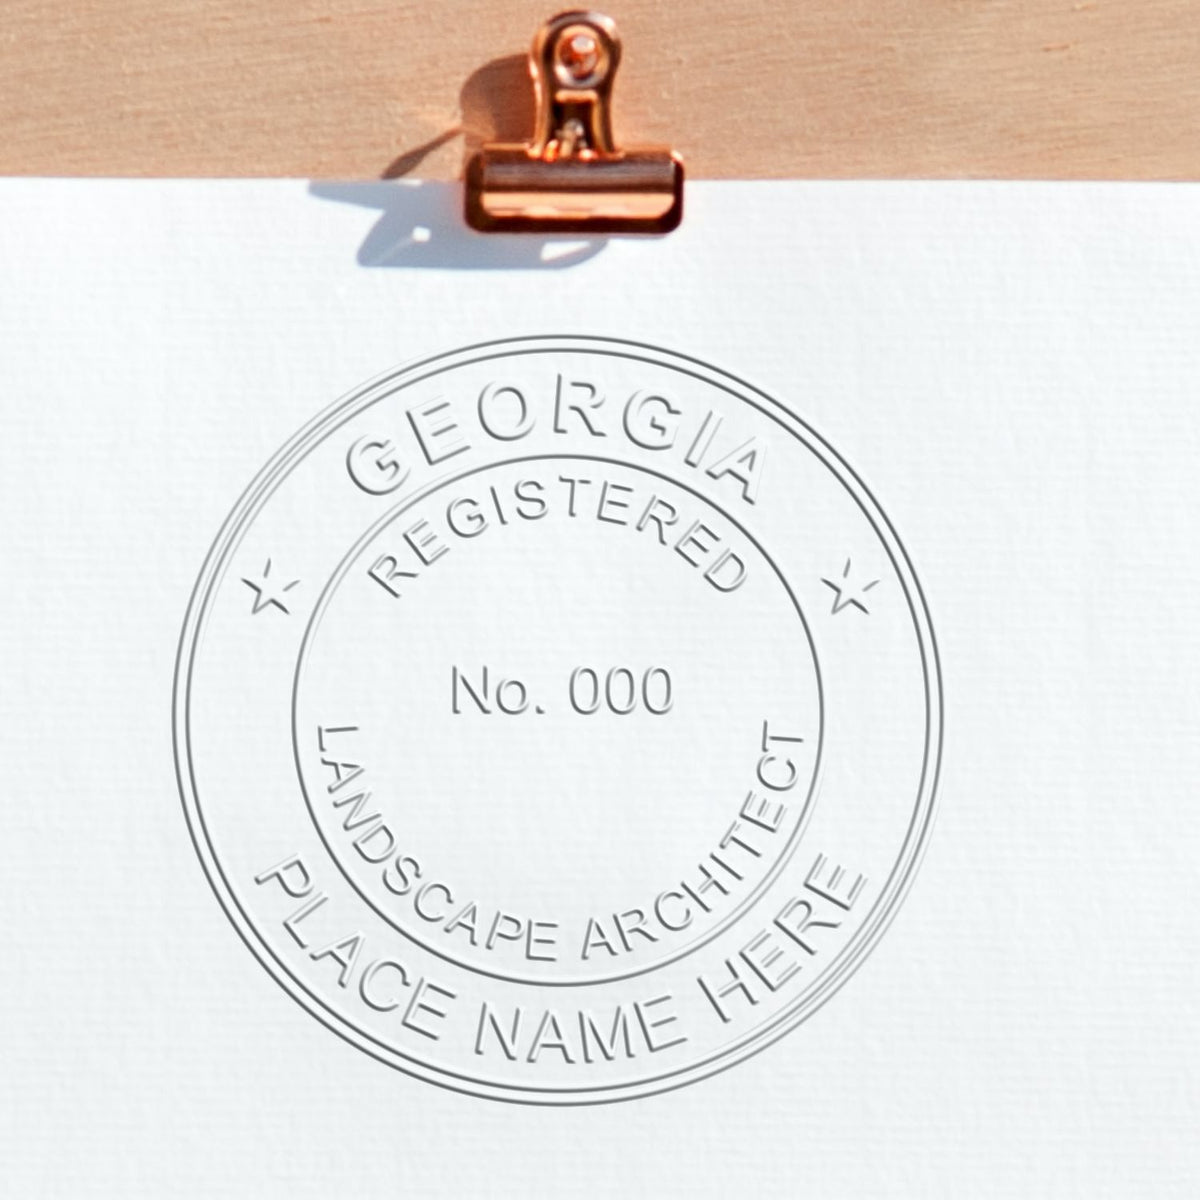 The Gift Georgia Landscape Architect Seal stamp impression comes to life with a crisp, detailed image stamped on paper - showcasing true professional quality.